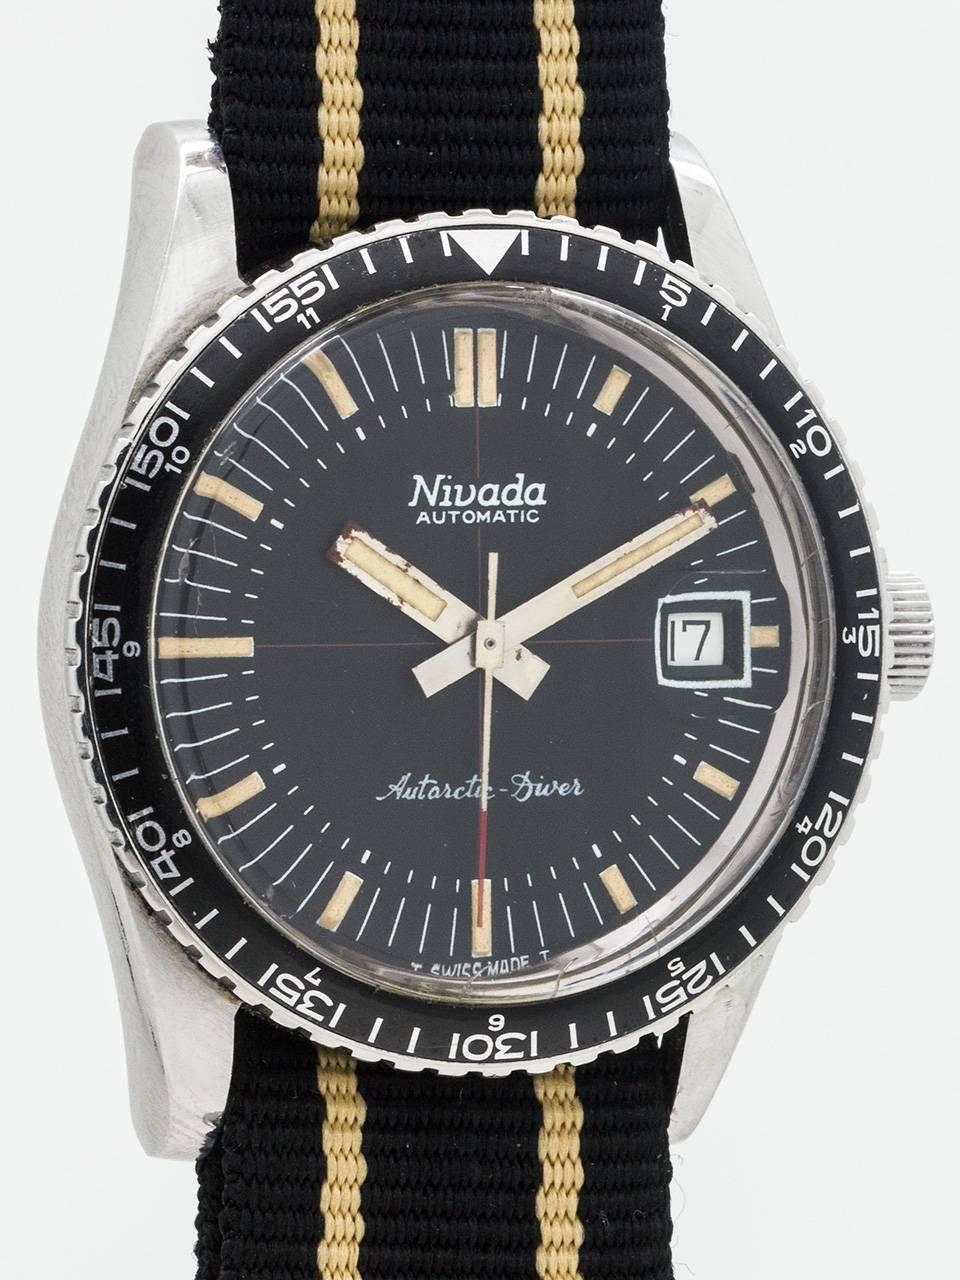 
Vintage Nivada Grenchen “Antarctic” diver’s model circa 1960’s. Featuring 35mm diameter screw back case with fine elapsed time bezel with indications for elapsed time and for 24 hour (2nd time zone). With original acrylic crystal with reverse